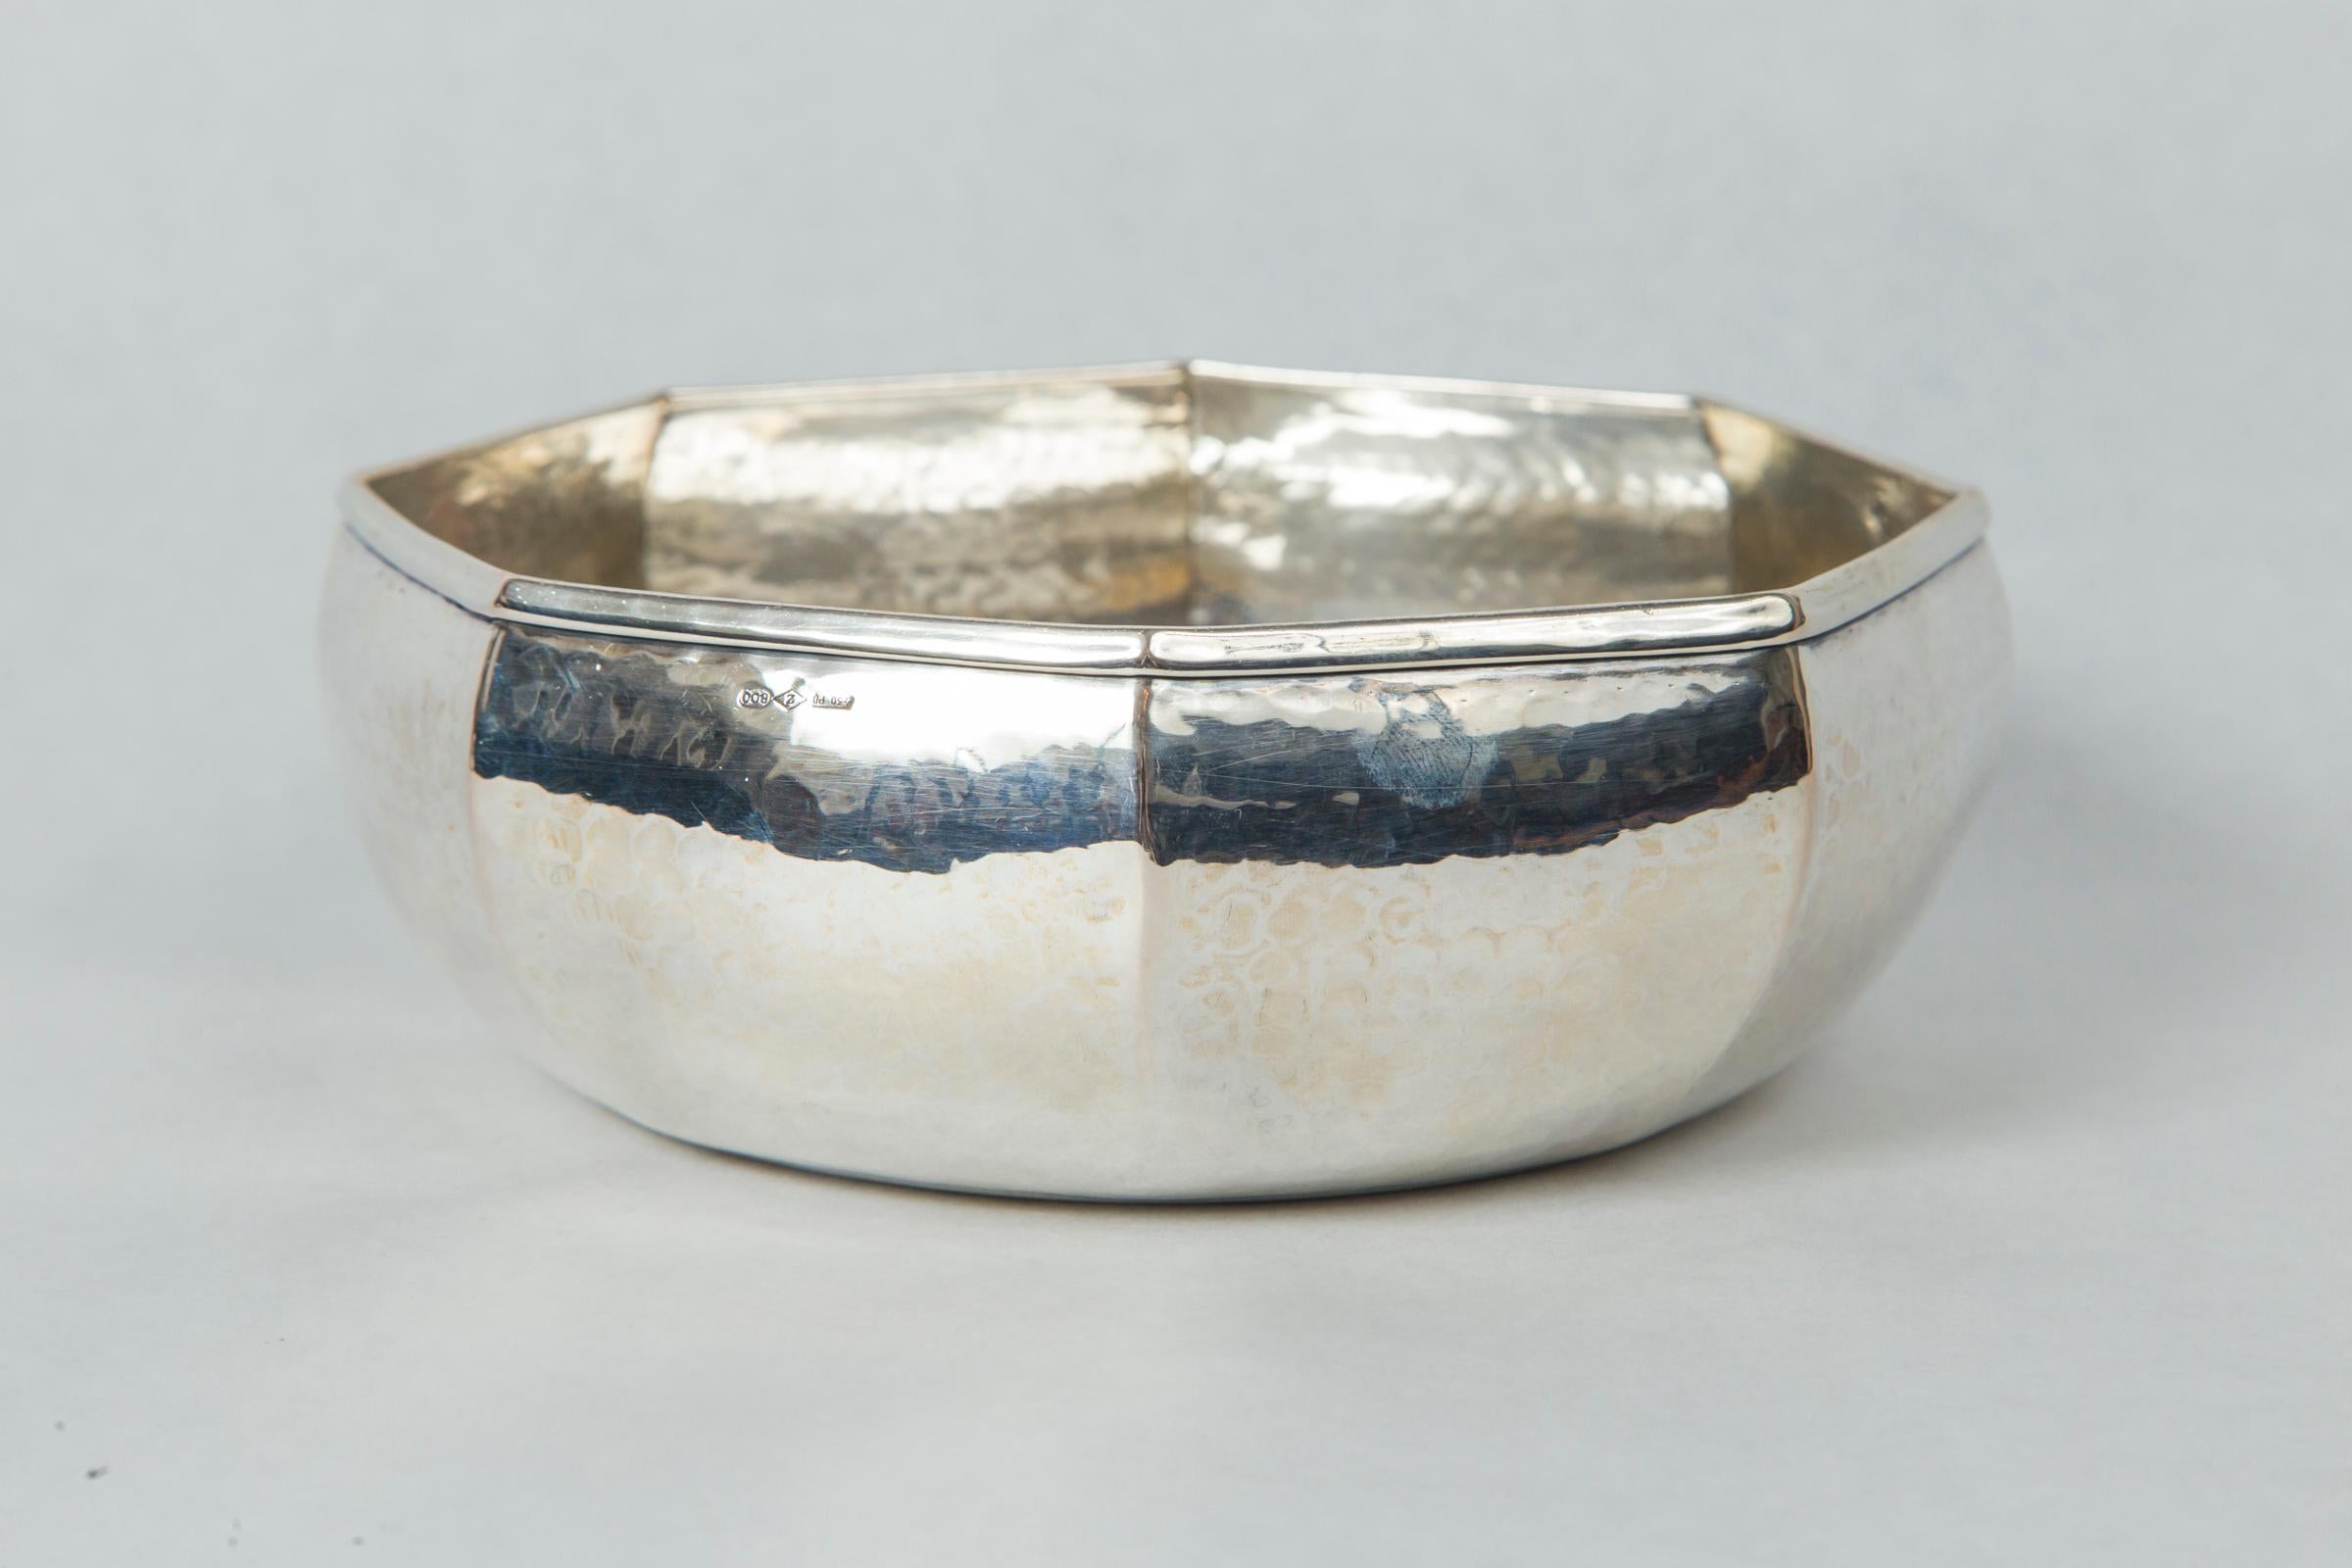 Octagonal bowl with rounded sides, entirely hammered by hand to get a special brightness. Made in the 1990s by the silverware company Zaramella of Padua, active for more than 70 years and well known for its refined and valuable silver items.
Silver